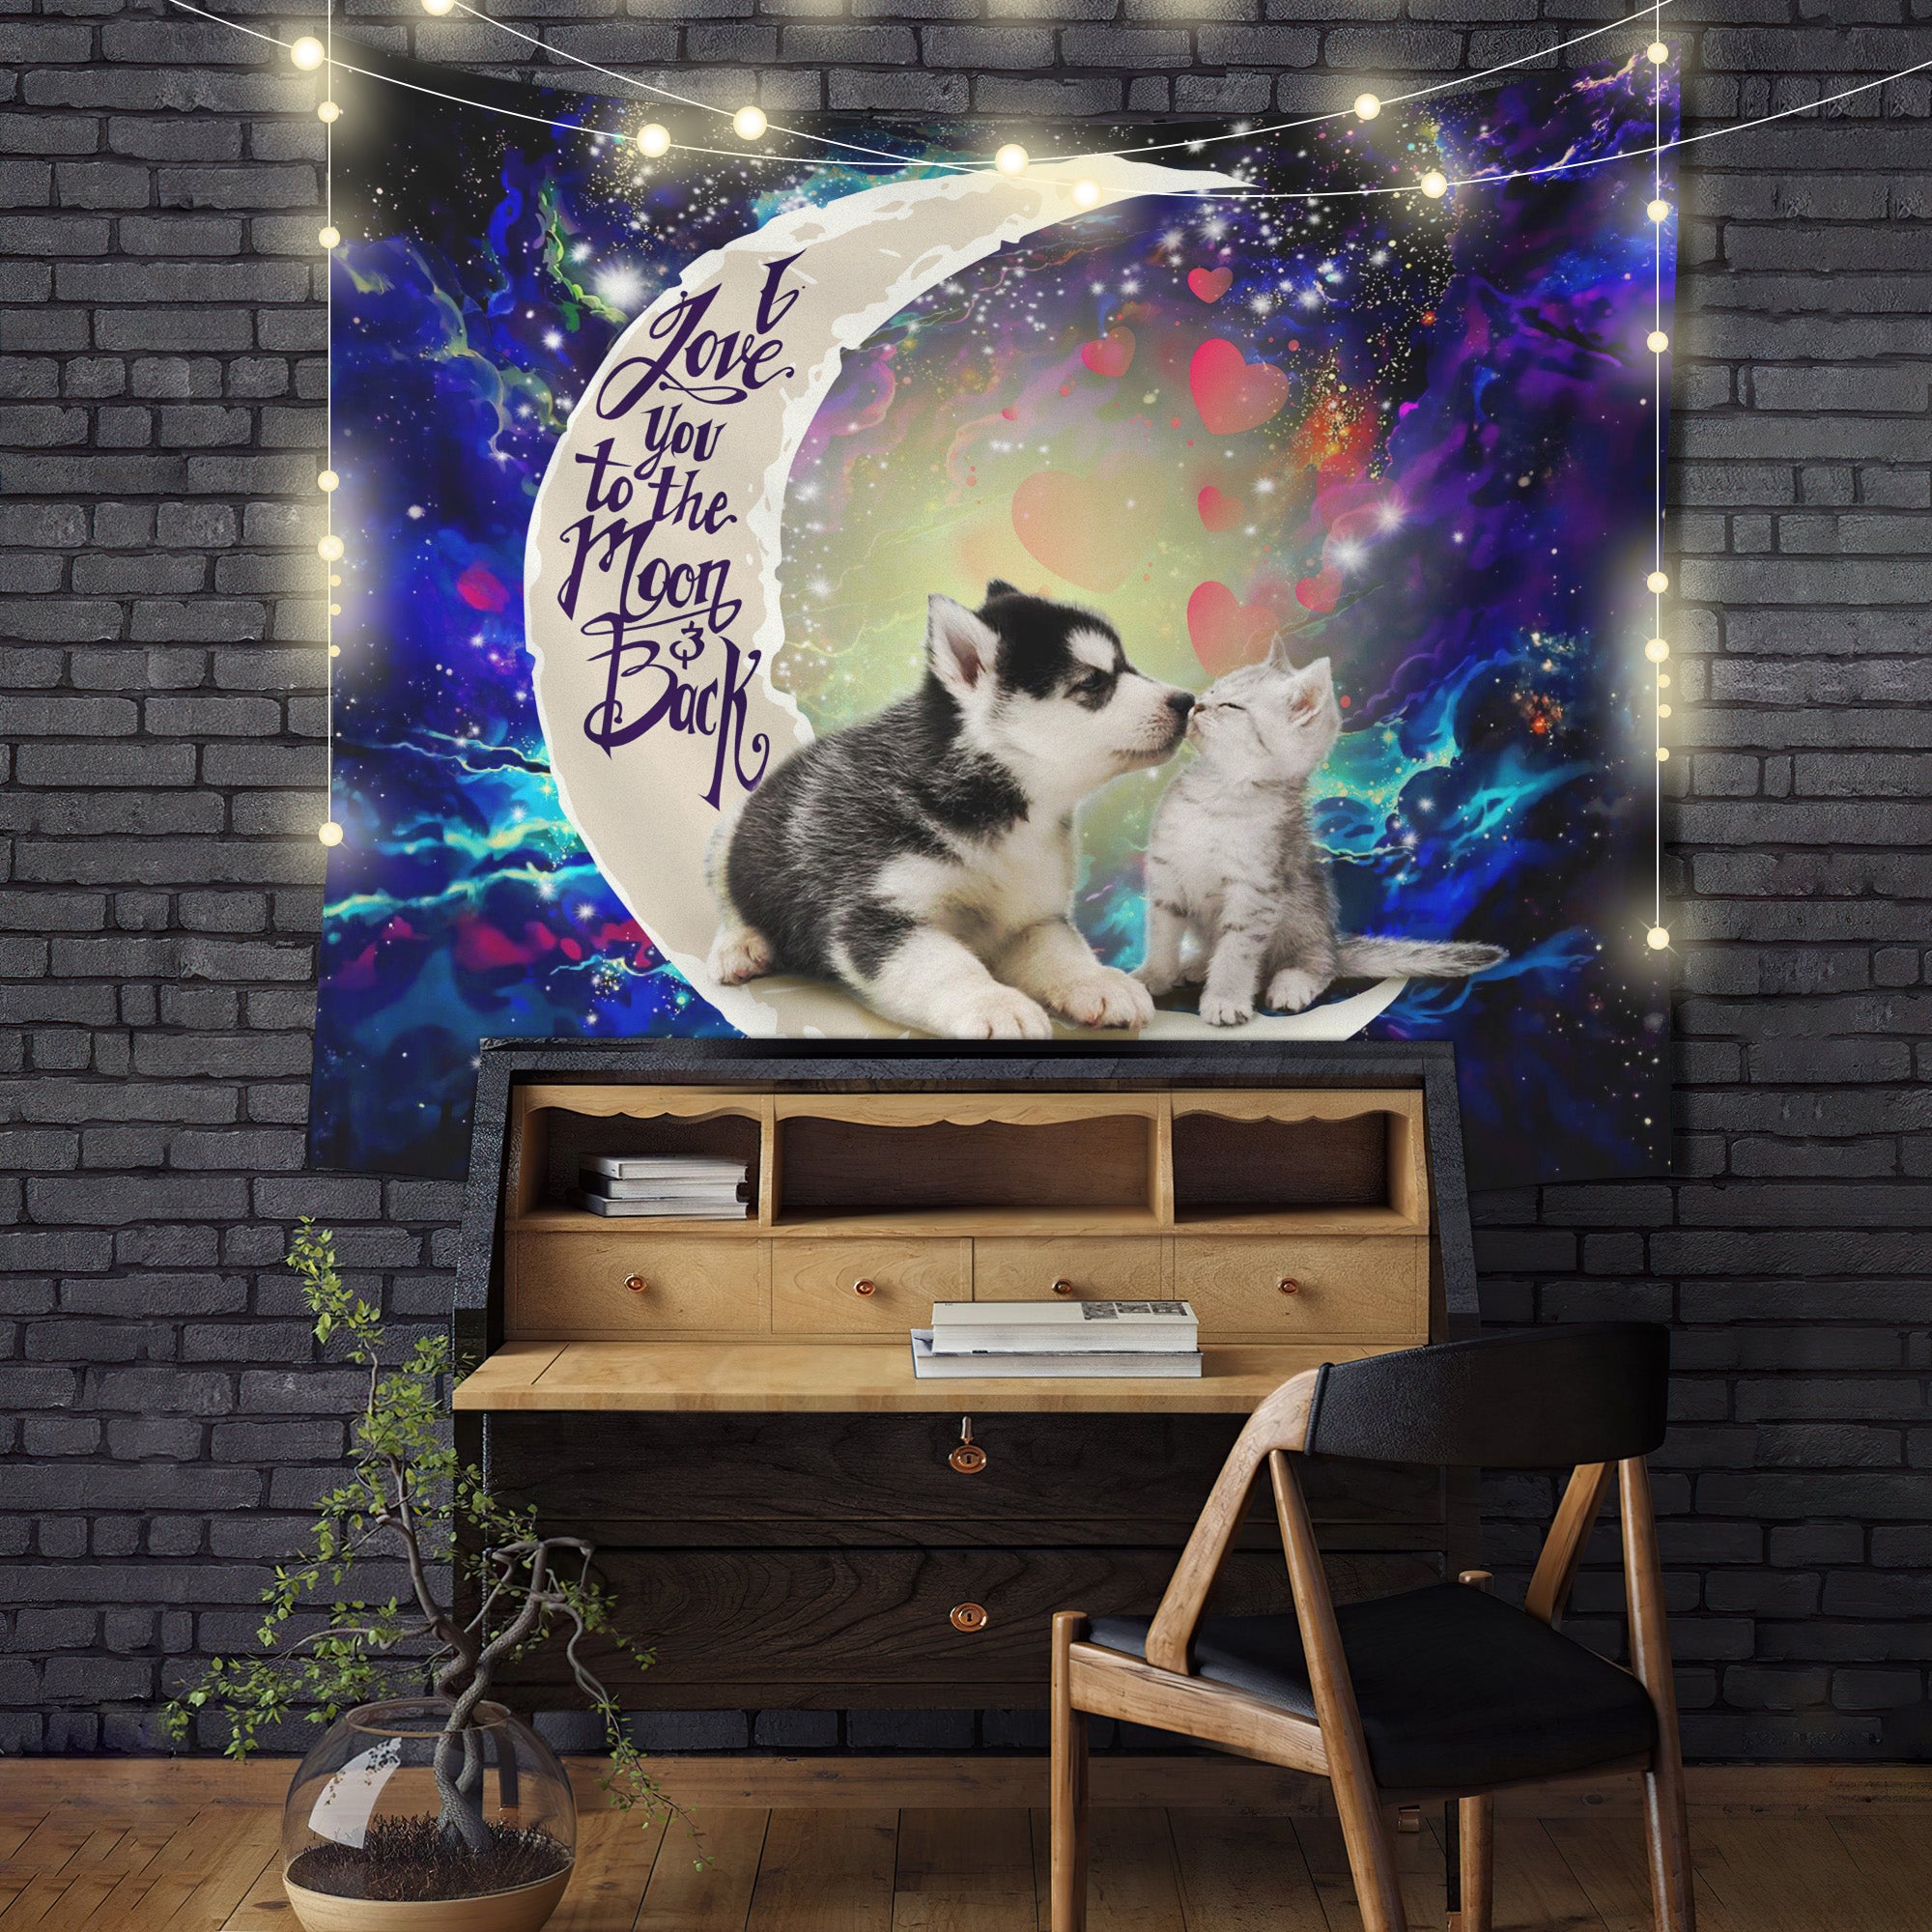 Cute Couple Husky And Cat Love You To The Moon Galaxy Tapestry Room Decor Nearkii